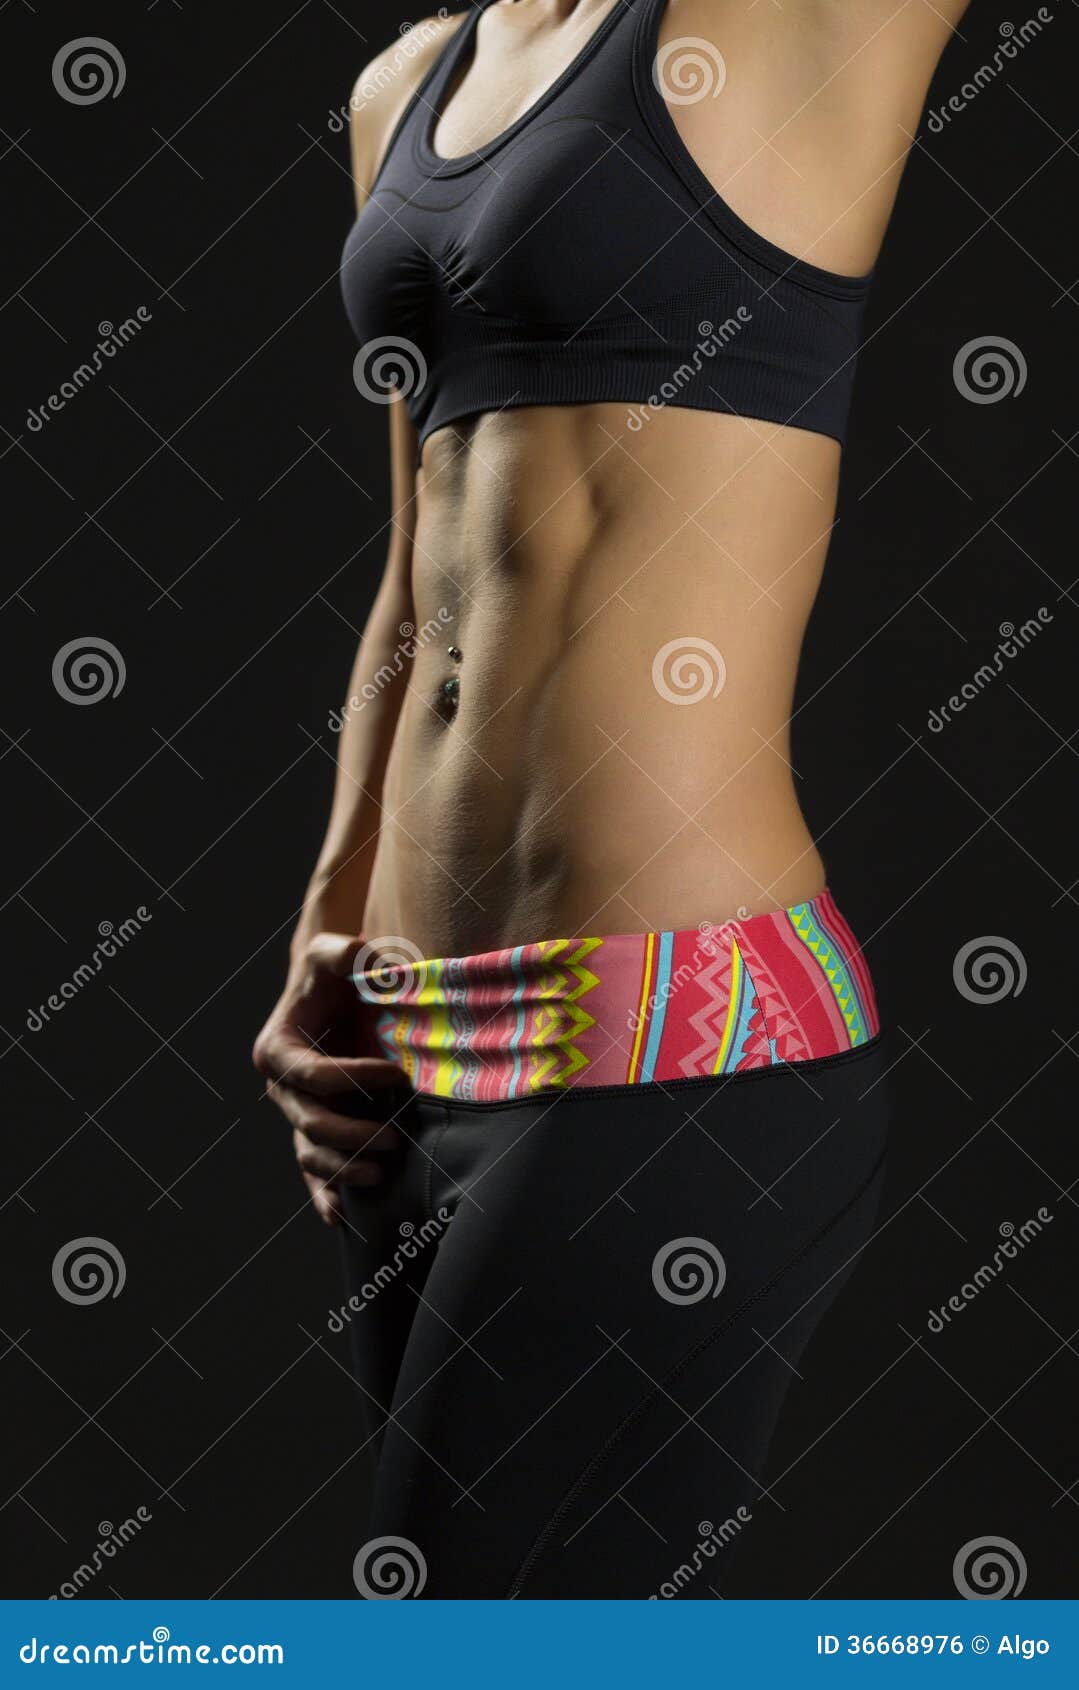 https://thumbs.dreamstime.com/z/sporty-woman-toned-abs-body-young-abdominal-muscles-black-background-36668976.jpg